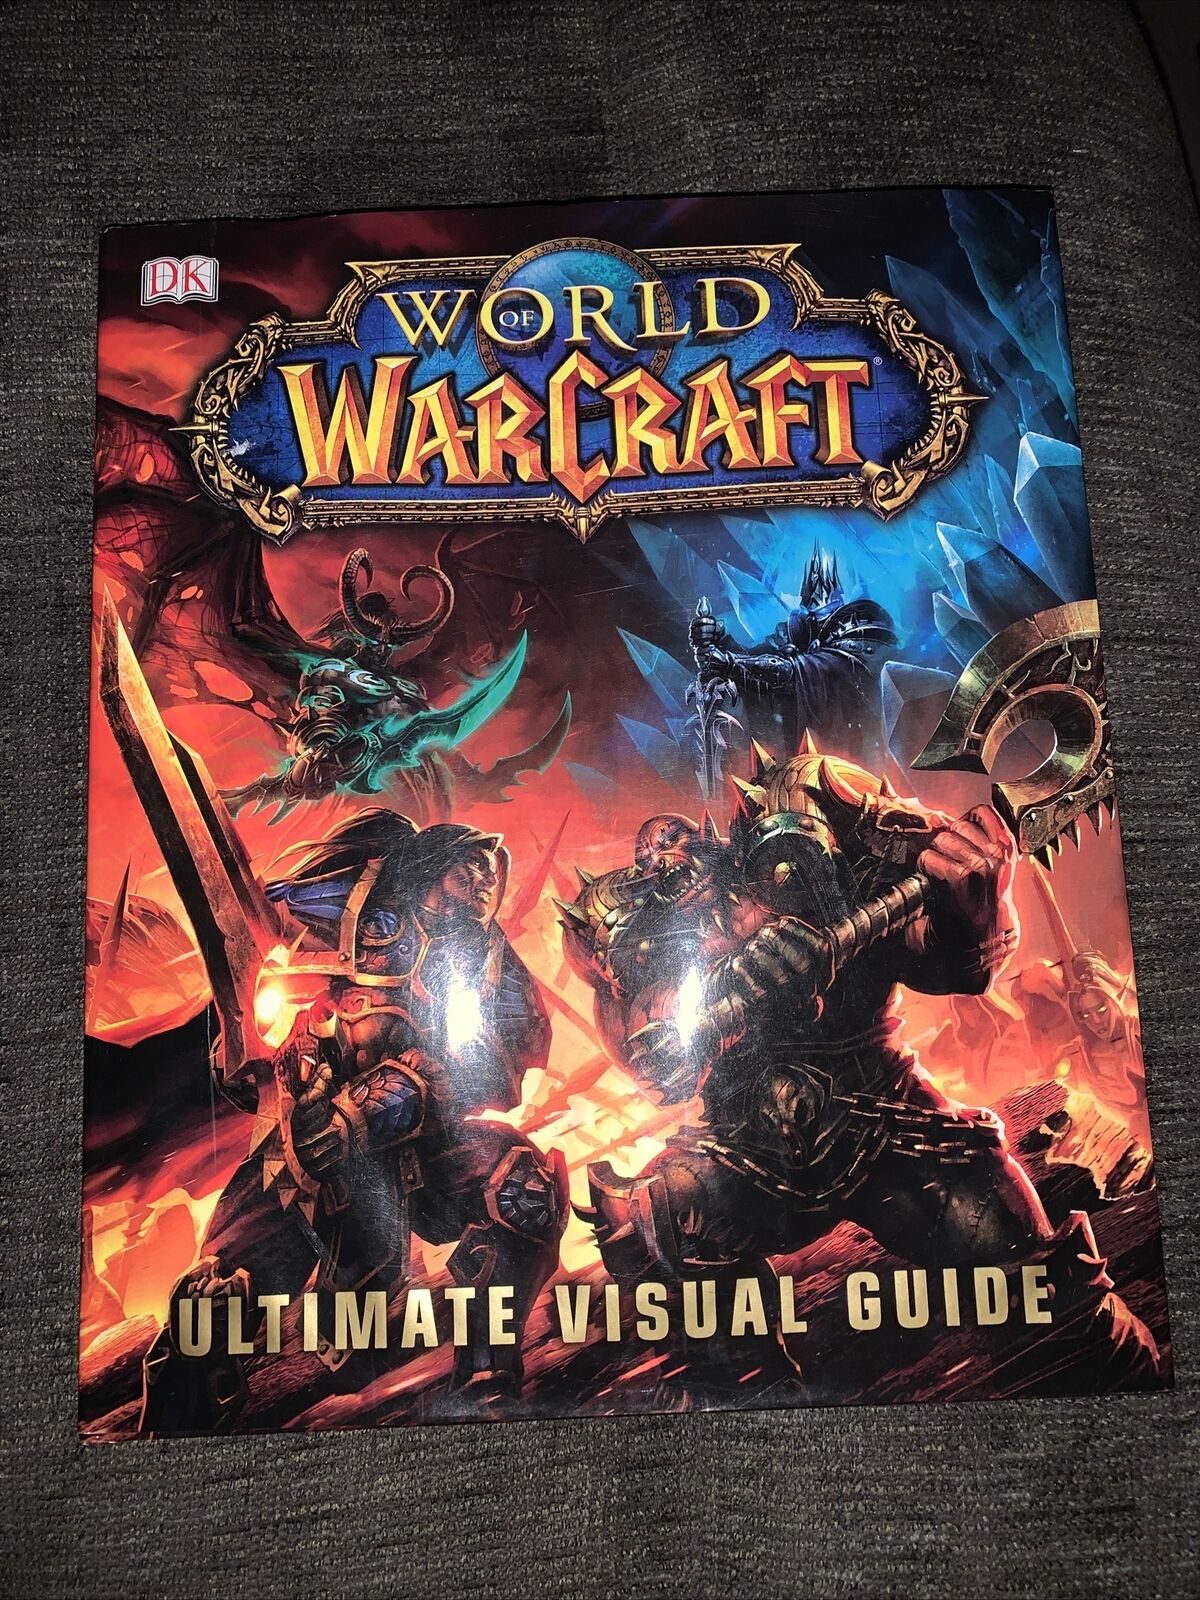 World of Warcraft Ultimate Visual Guide HCDJ 1st/1st Print Hardcover Role Play